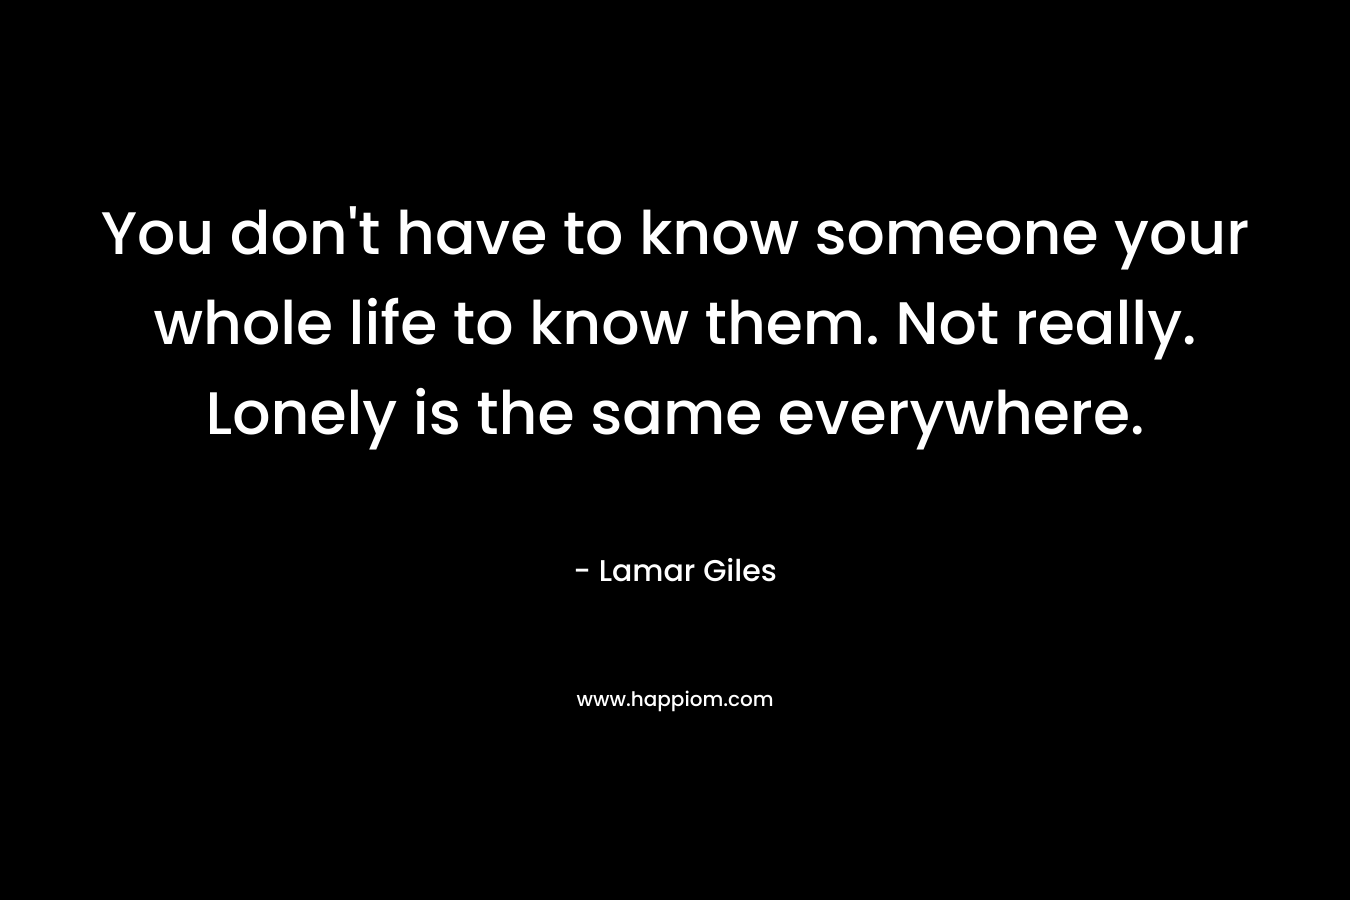 You don't have to know someone your whole life to know them. Not really. Lonely is the same everywhere.